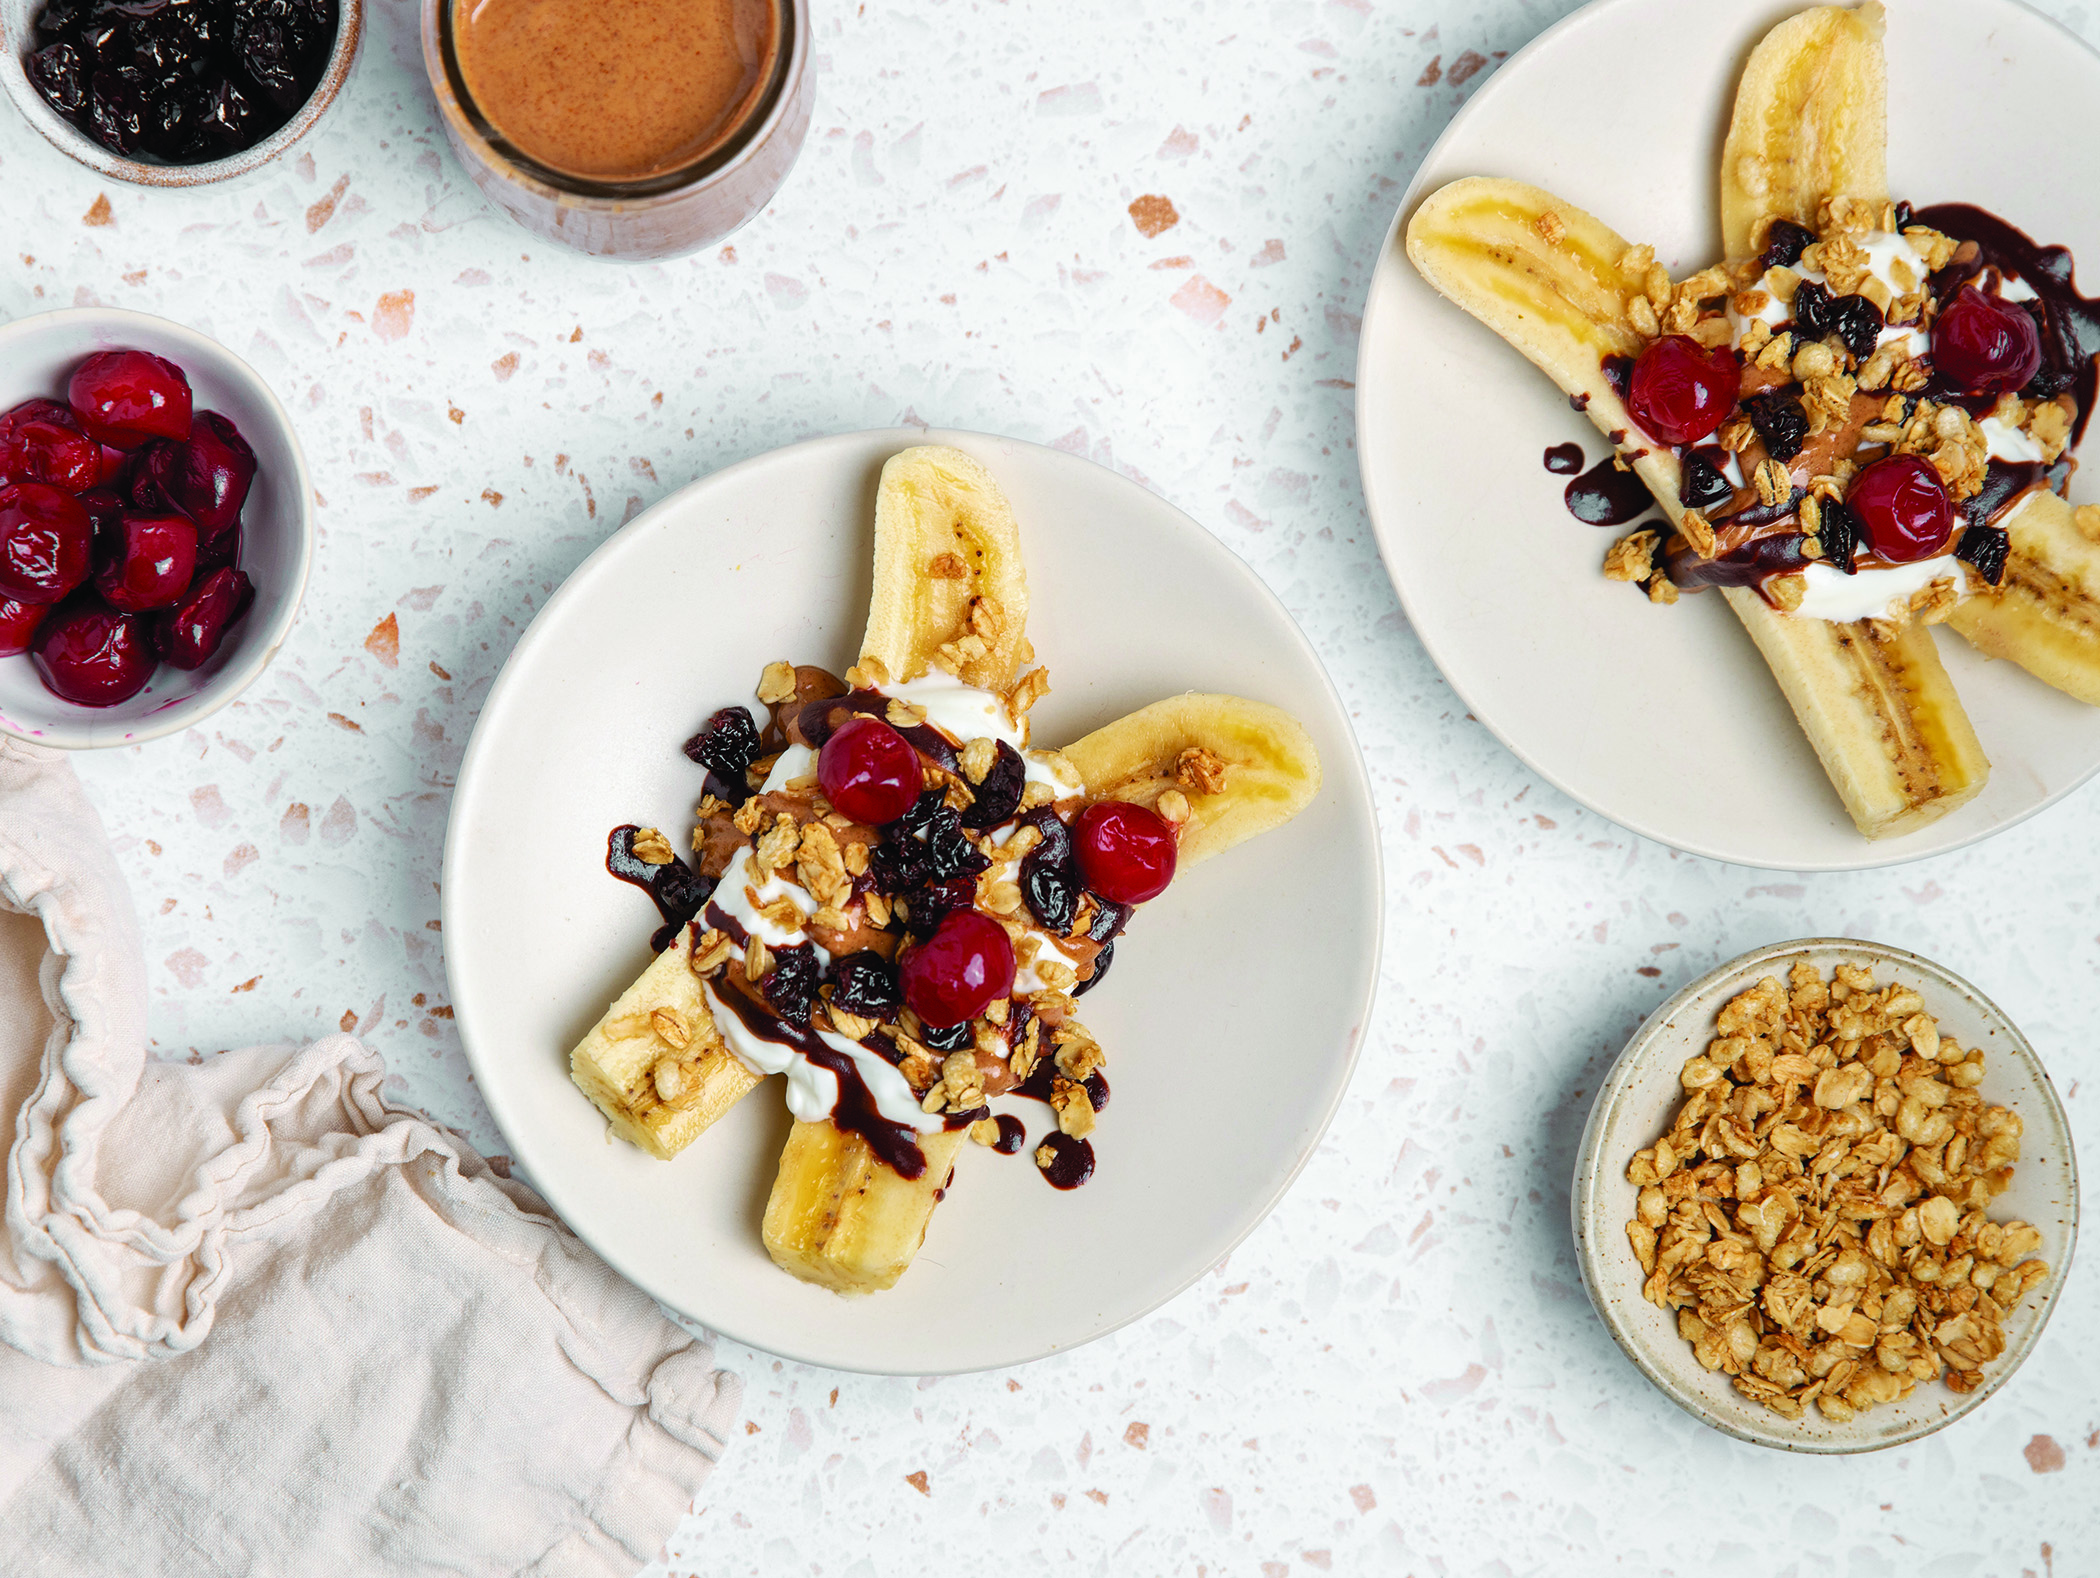 Tart Cherry Superfood Banana Splits. Find more recipes at www.choosecherries.com. (Photo courtesy of Family Features.)